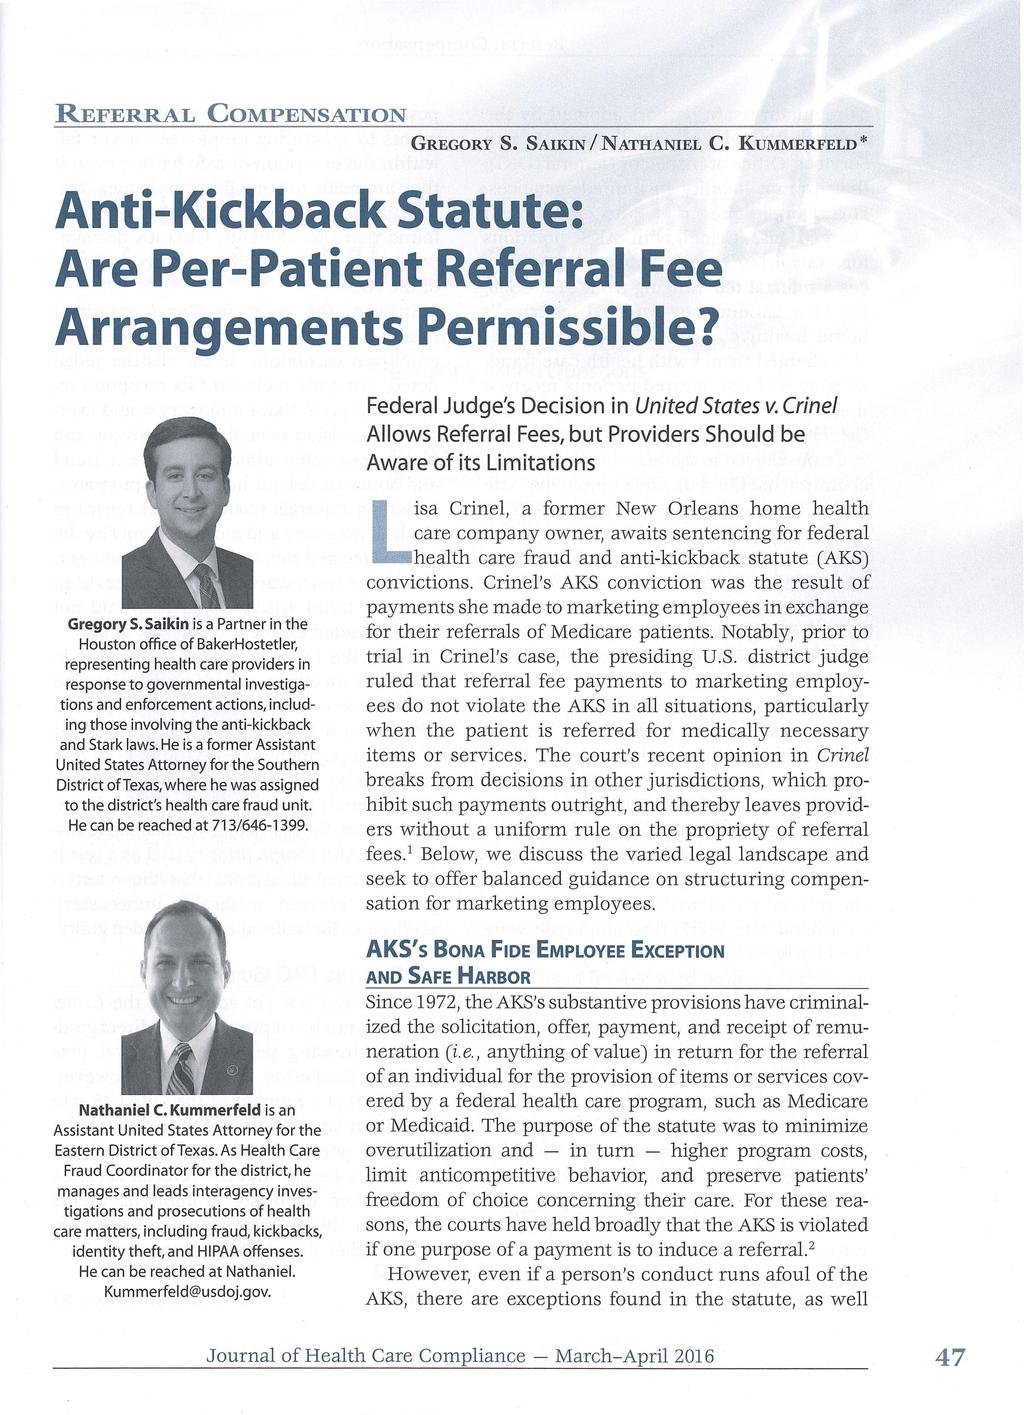 REFERRAL COMPENSATION GREGORY S. SAIK.IN/NATHANIEL C. KUMMERFELD* Anti-Kickback Statute: Are Per-Patient Referral Fee Arrangements Permissible? Federal Judge's Decision in United States v.